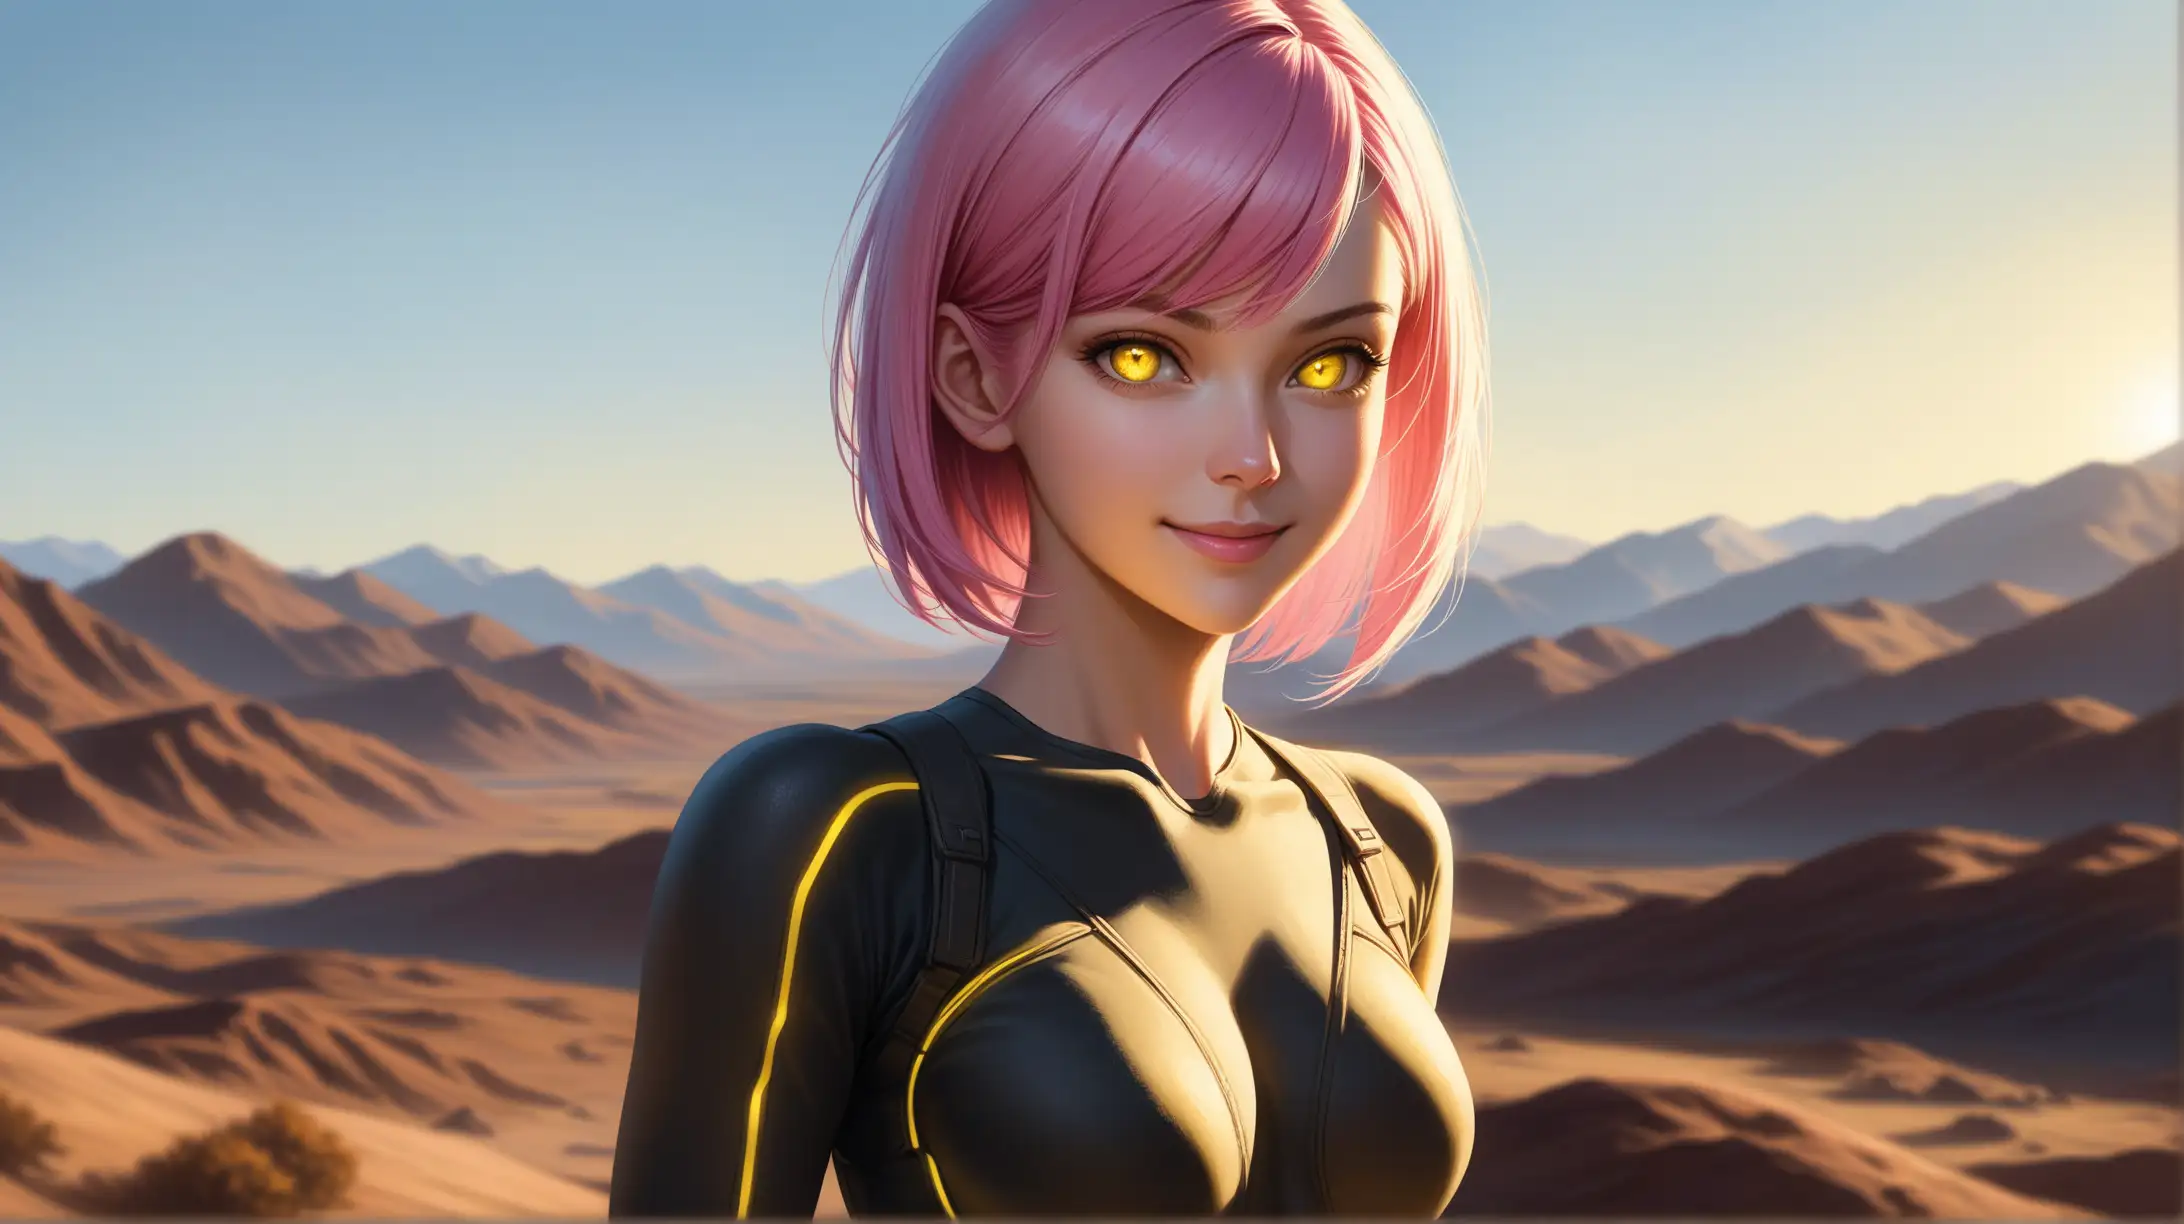 Seductive Woman with Pink Hair and FalloutInspired Clothing in Ambient Outdoor Setting